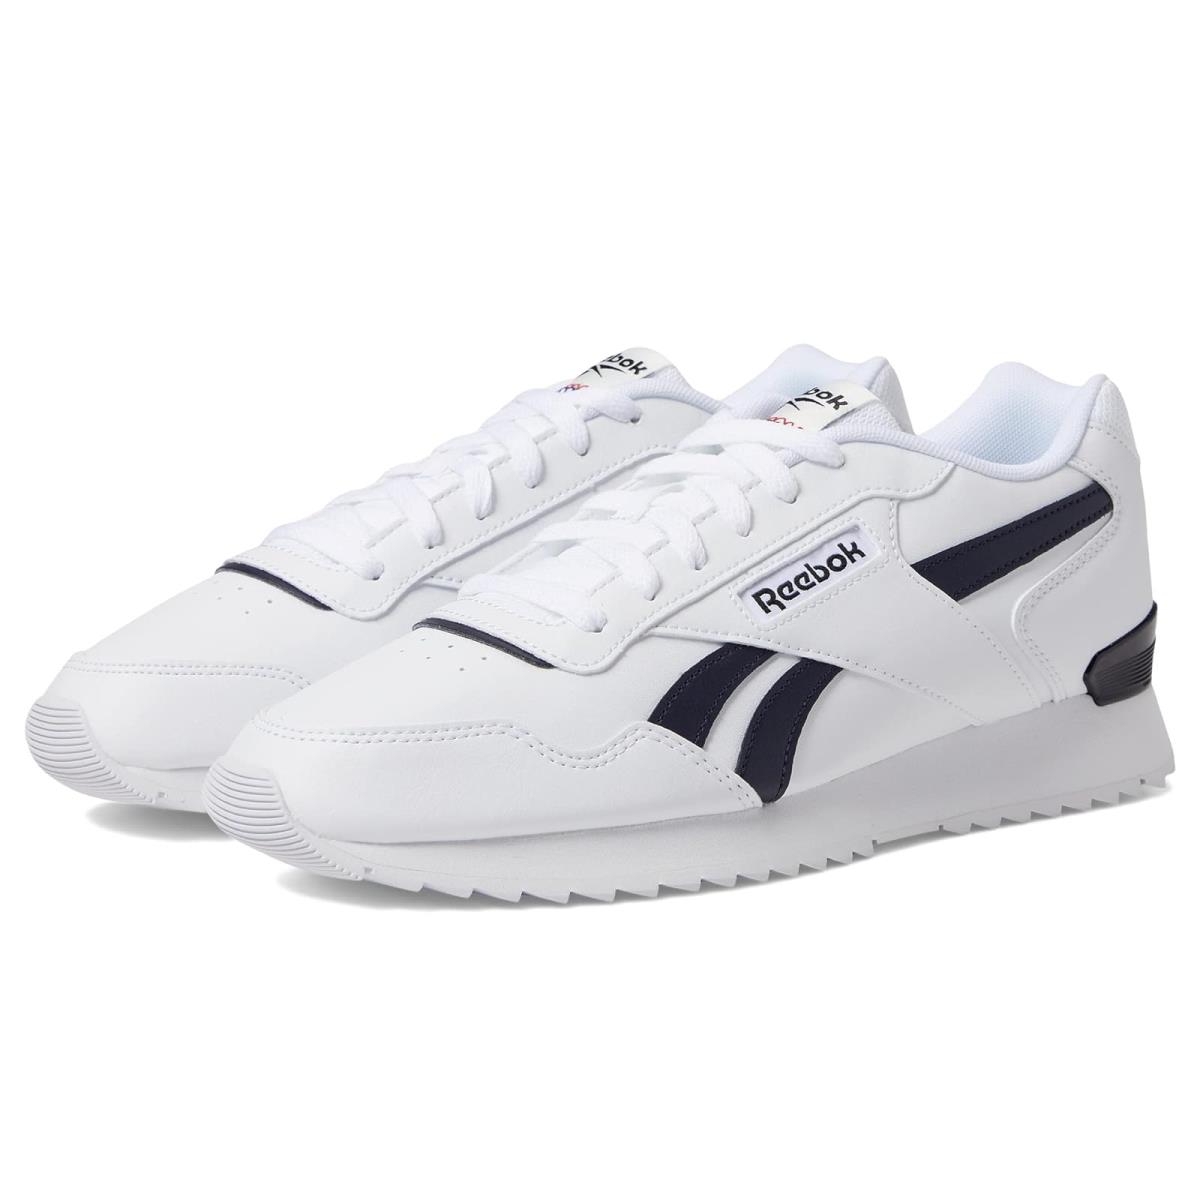 Unisex Sneakers Athletic Shoes Reebok Glide Ripple Clip White/Vector Navy/Black